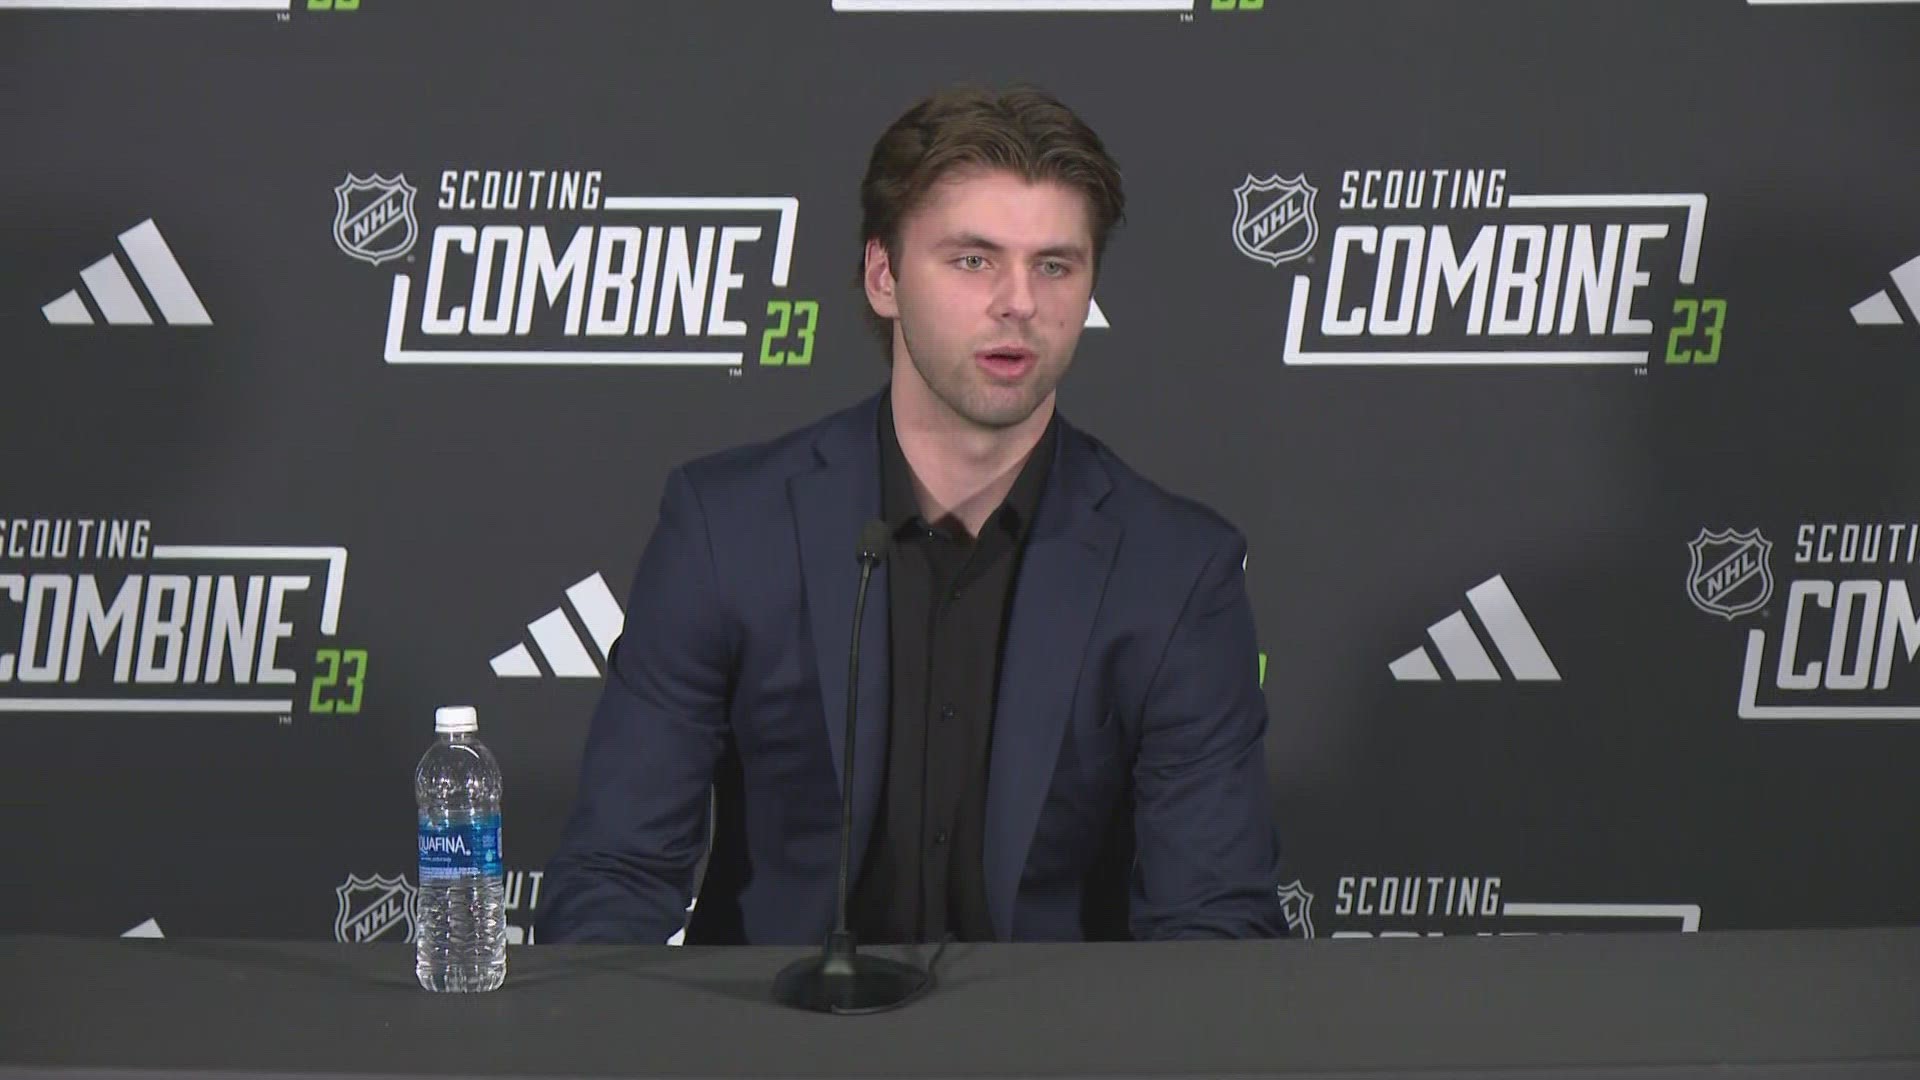 Prospects Connor Bedard, Adam Fantilli, and Leo Carlsson, as well as director of NHL Central Scouting Dan Marr, spoke Friday during a news conference.